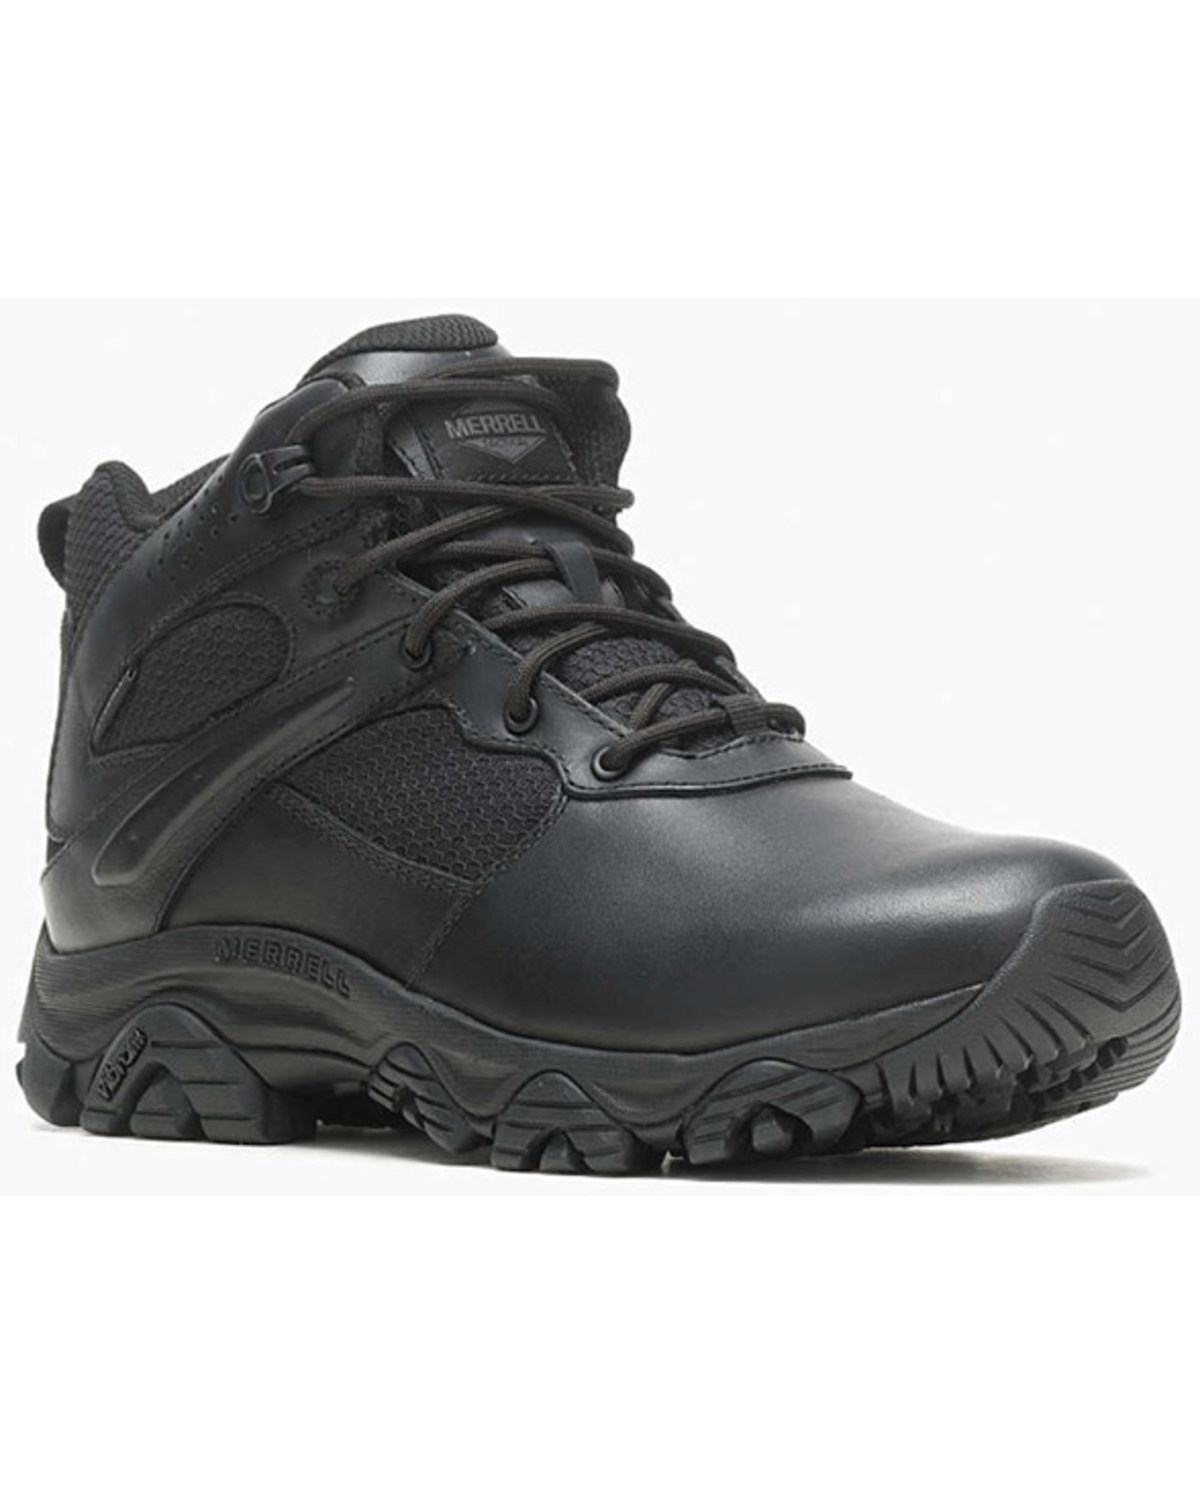 Merrell Men's Moab 3 Mid Tactical Response Waterproof Work Boots - Round Toe